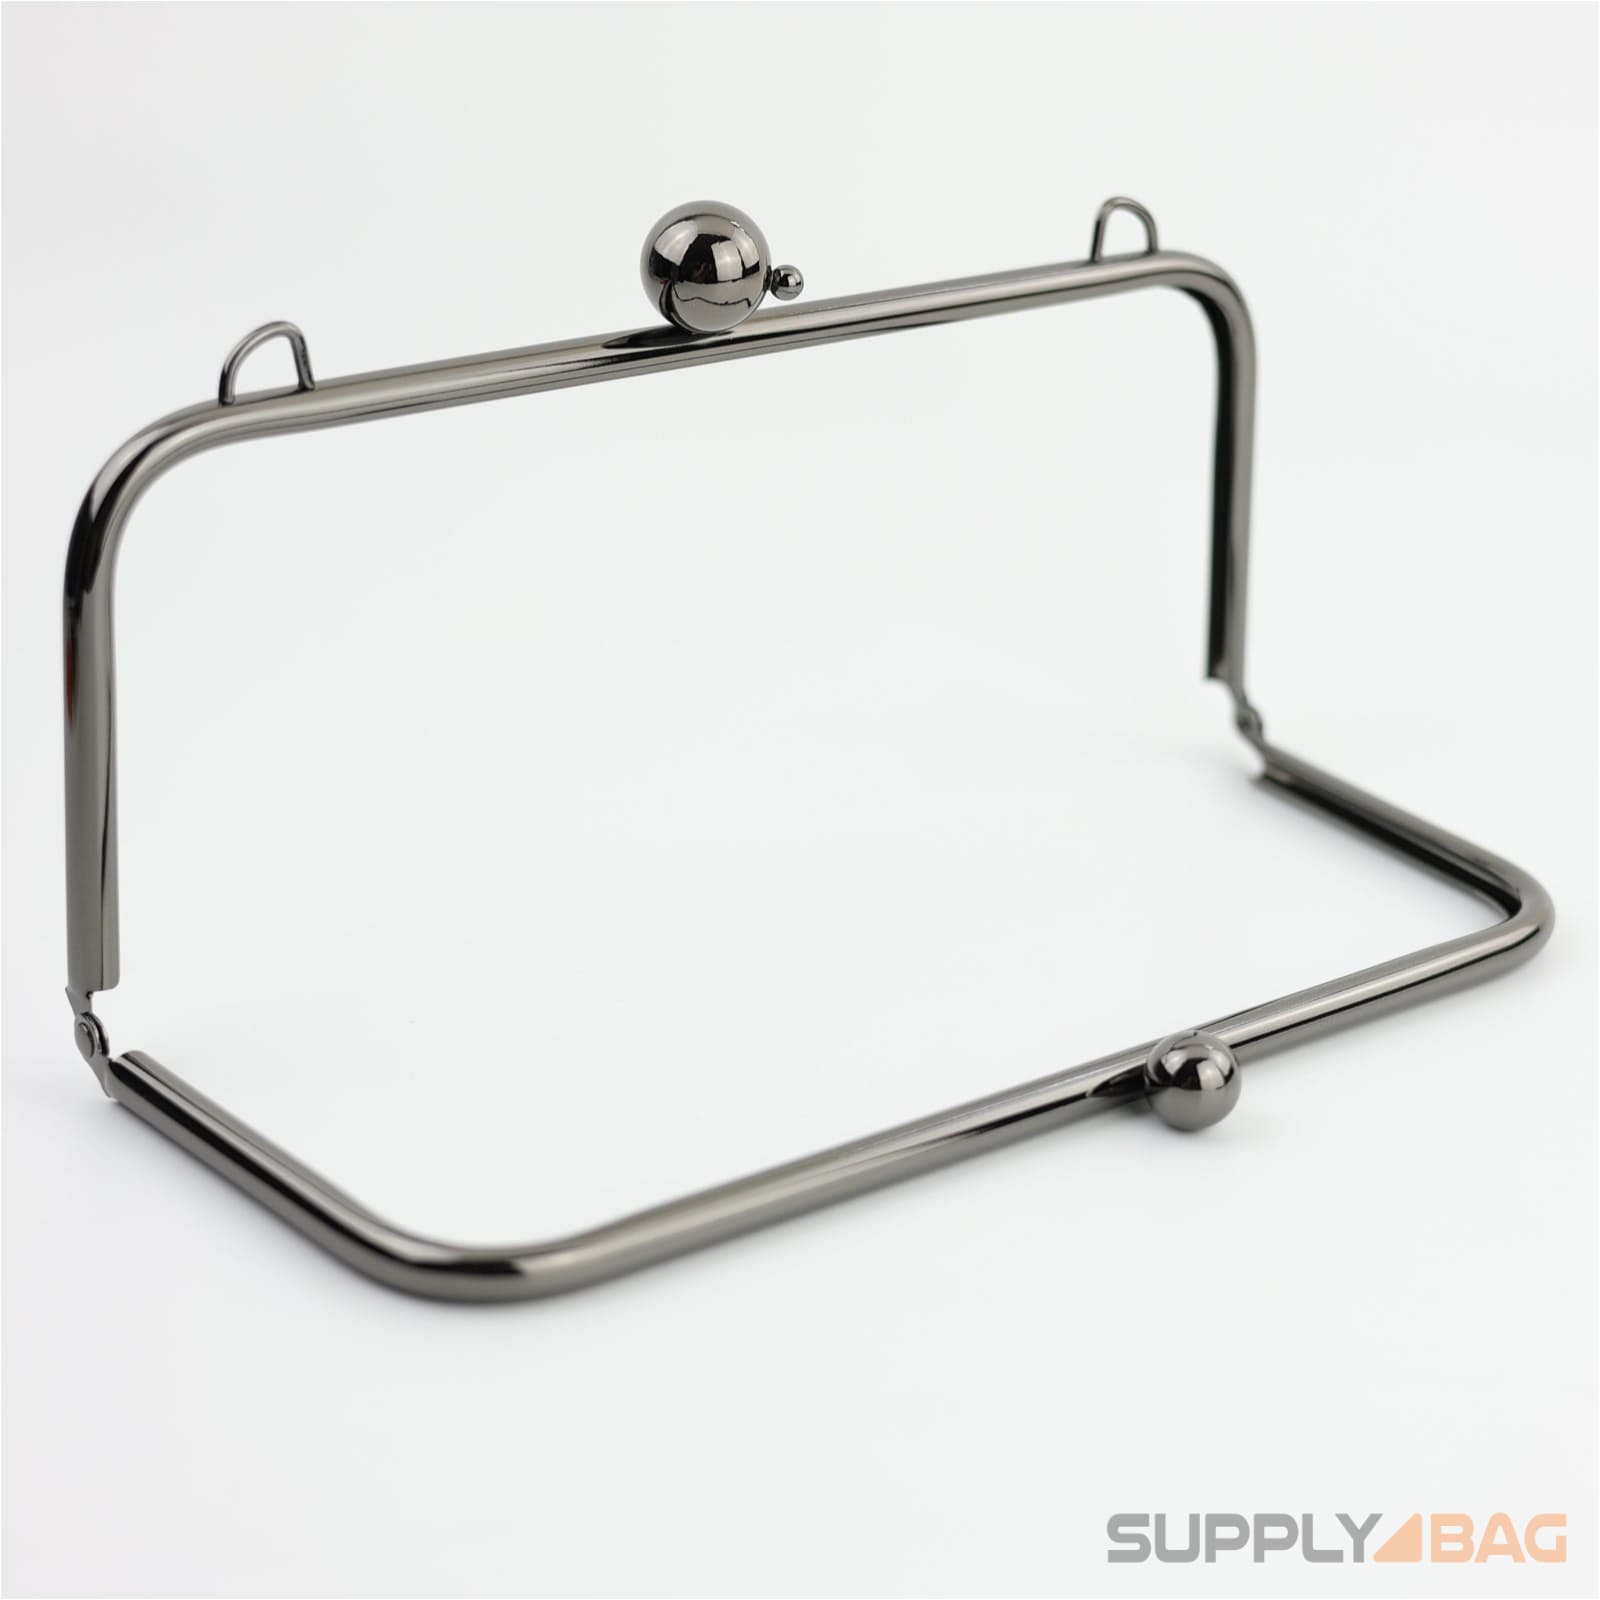 10 x 4 inch Large Gunmetal Clutch Frame with Chain Loops Atop